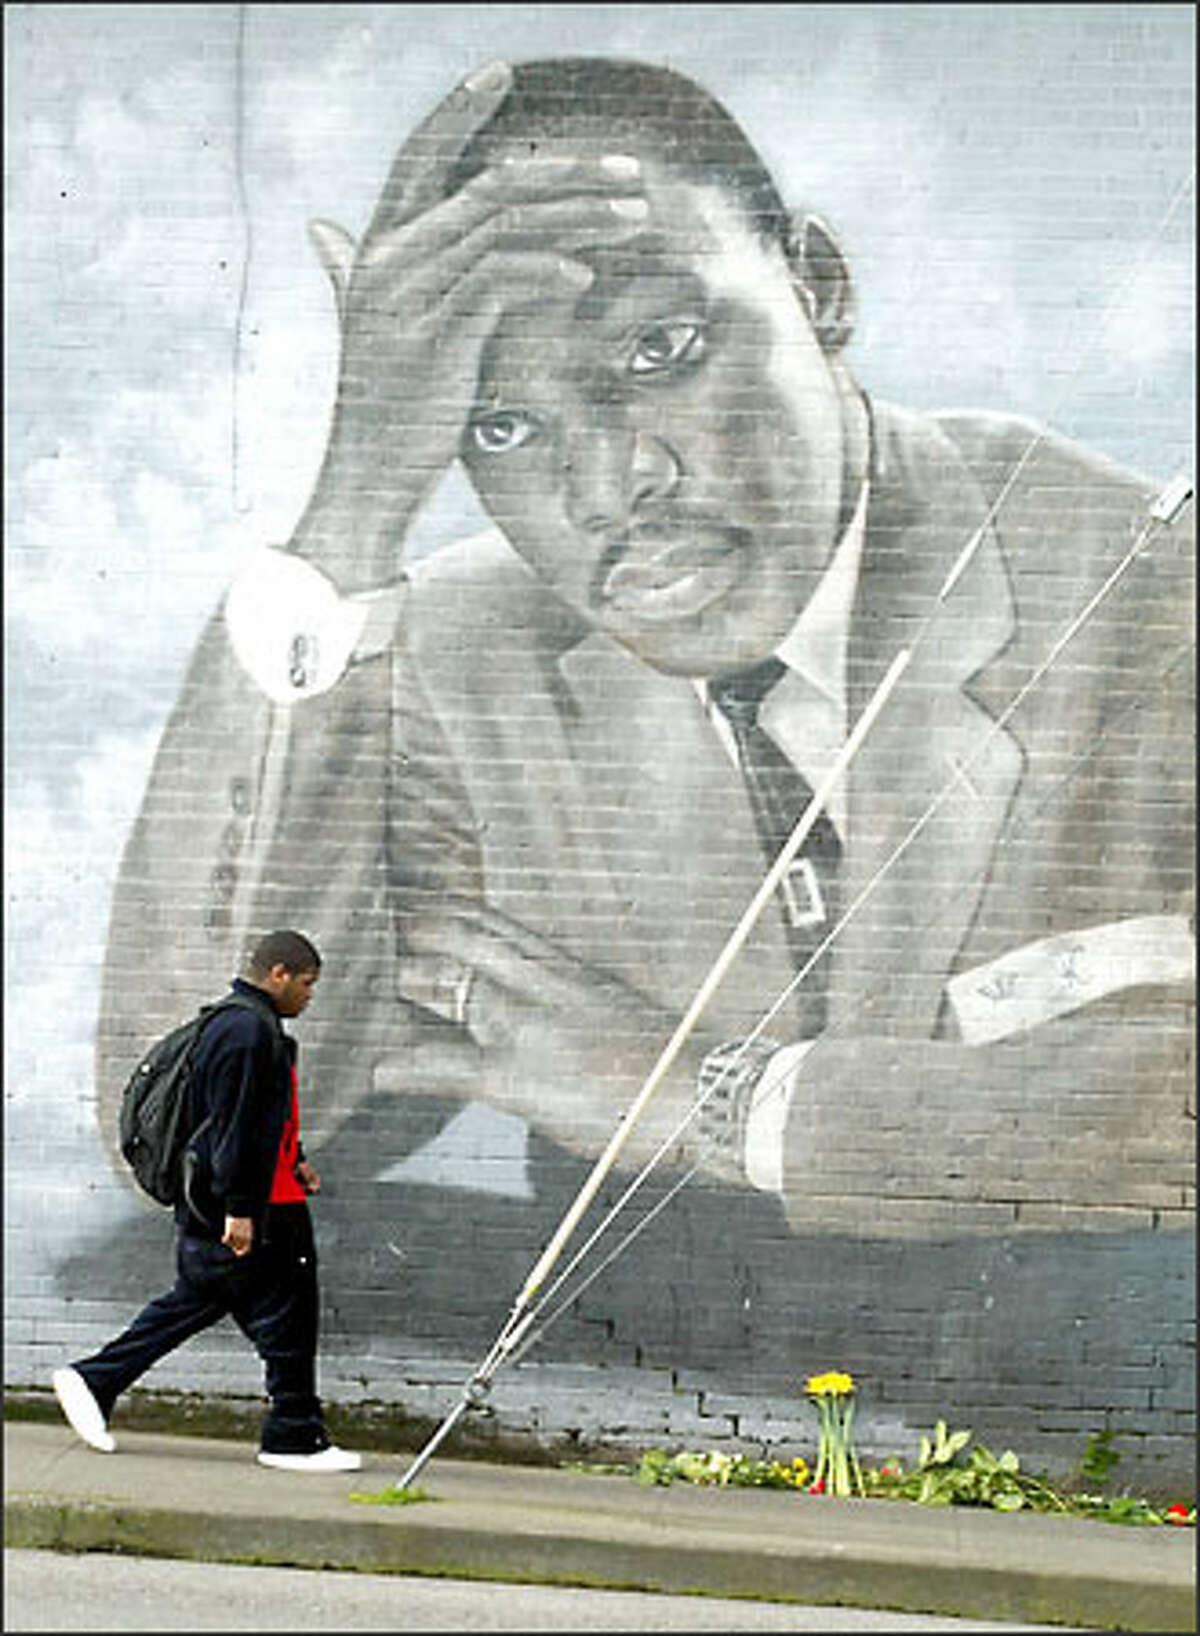 In commemoration of King's birthday, schoolchildren brought flowers and notes addressed to the slain peace activist and placed them below the mural at the intersection of MLK Way East and East Cherry Street.